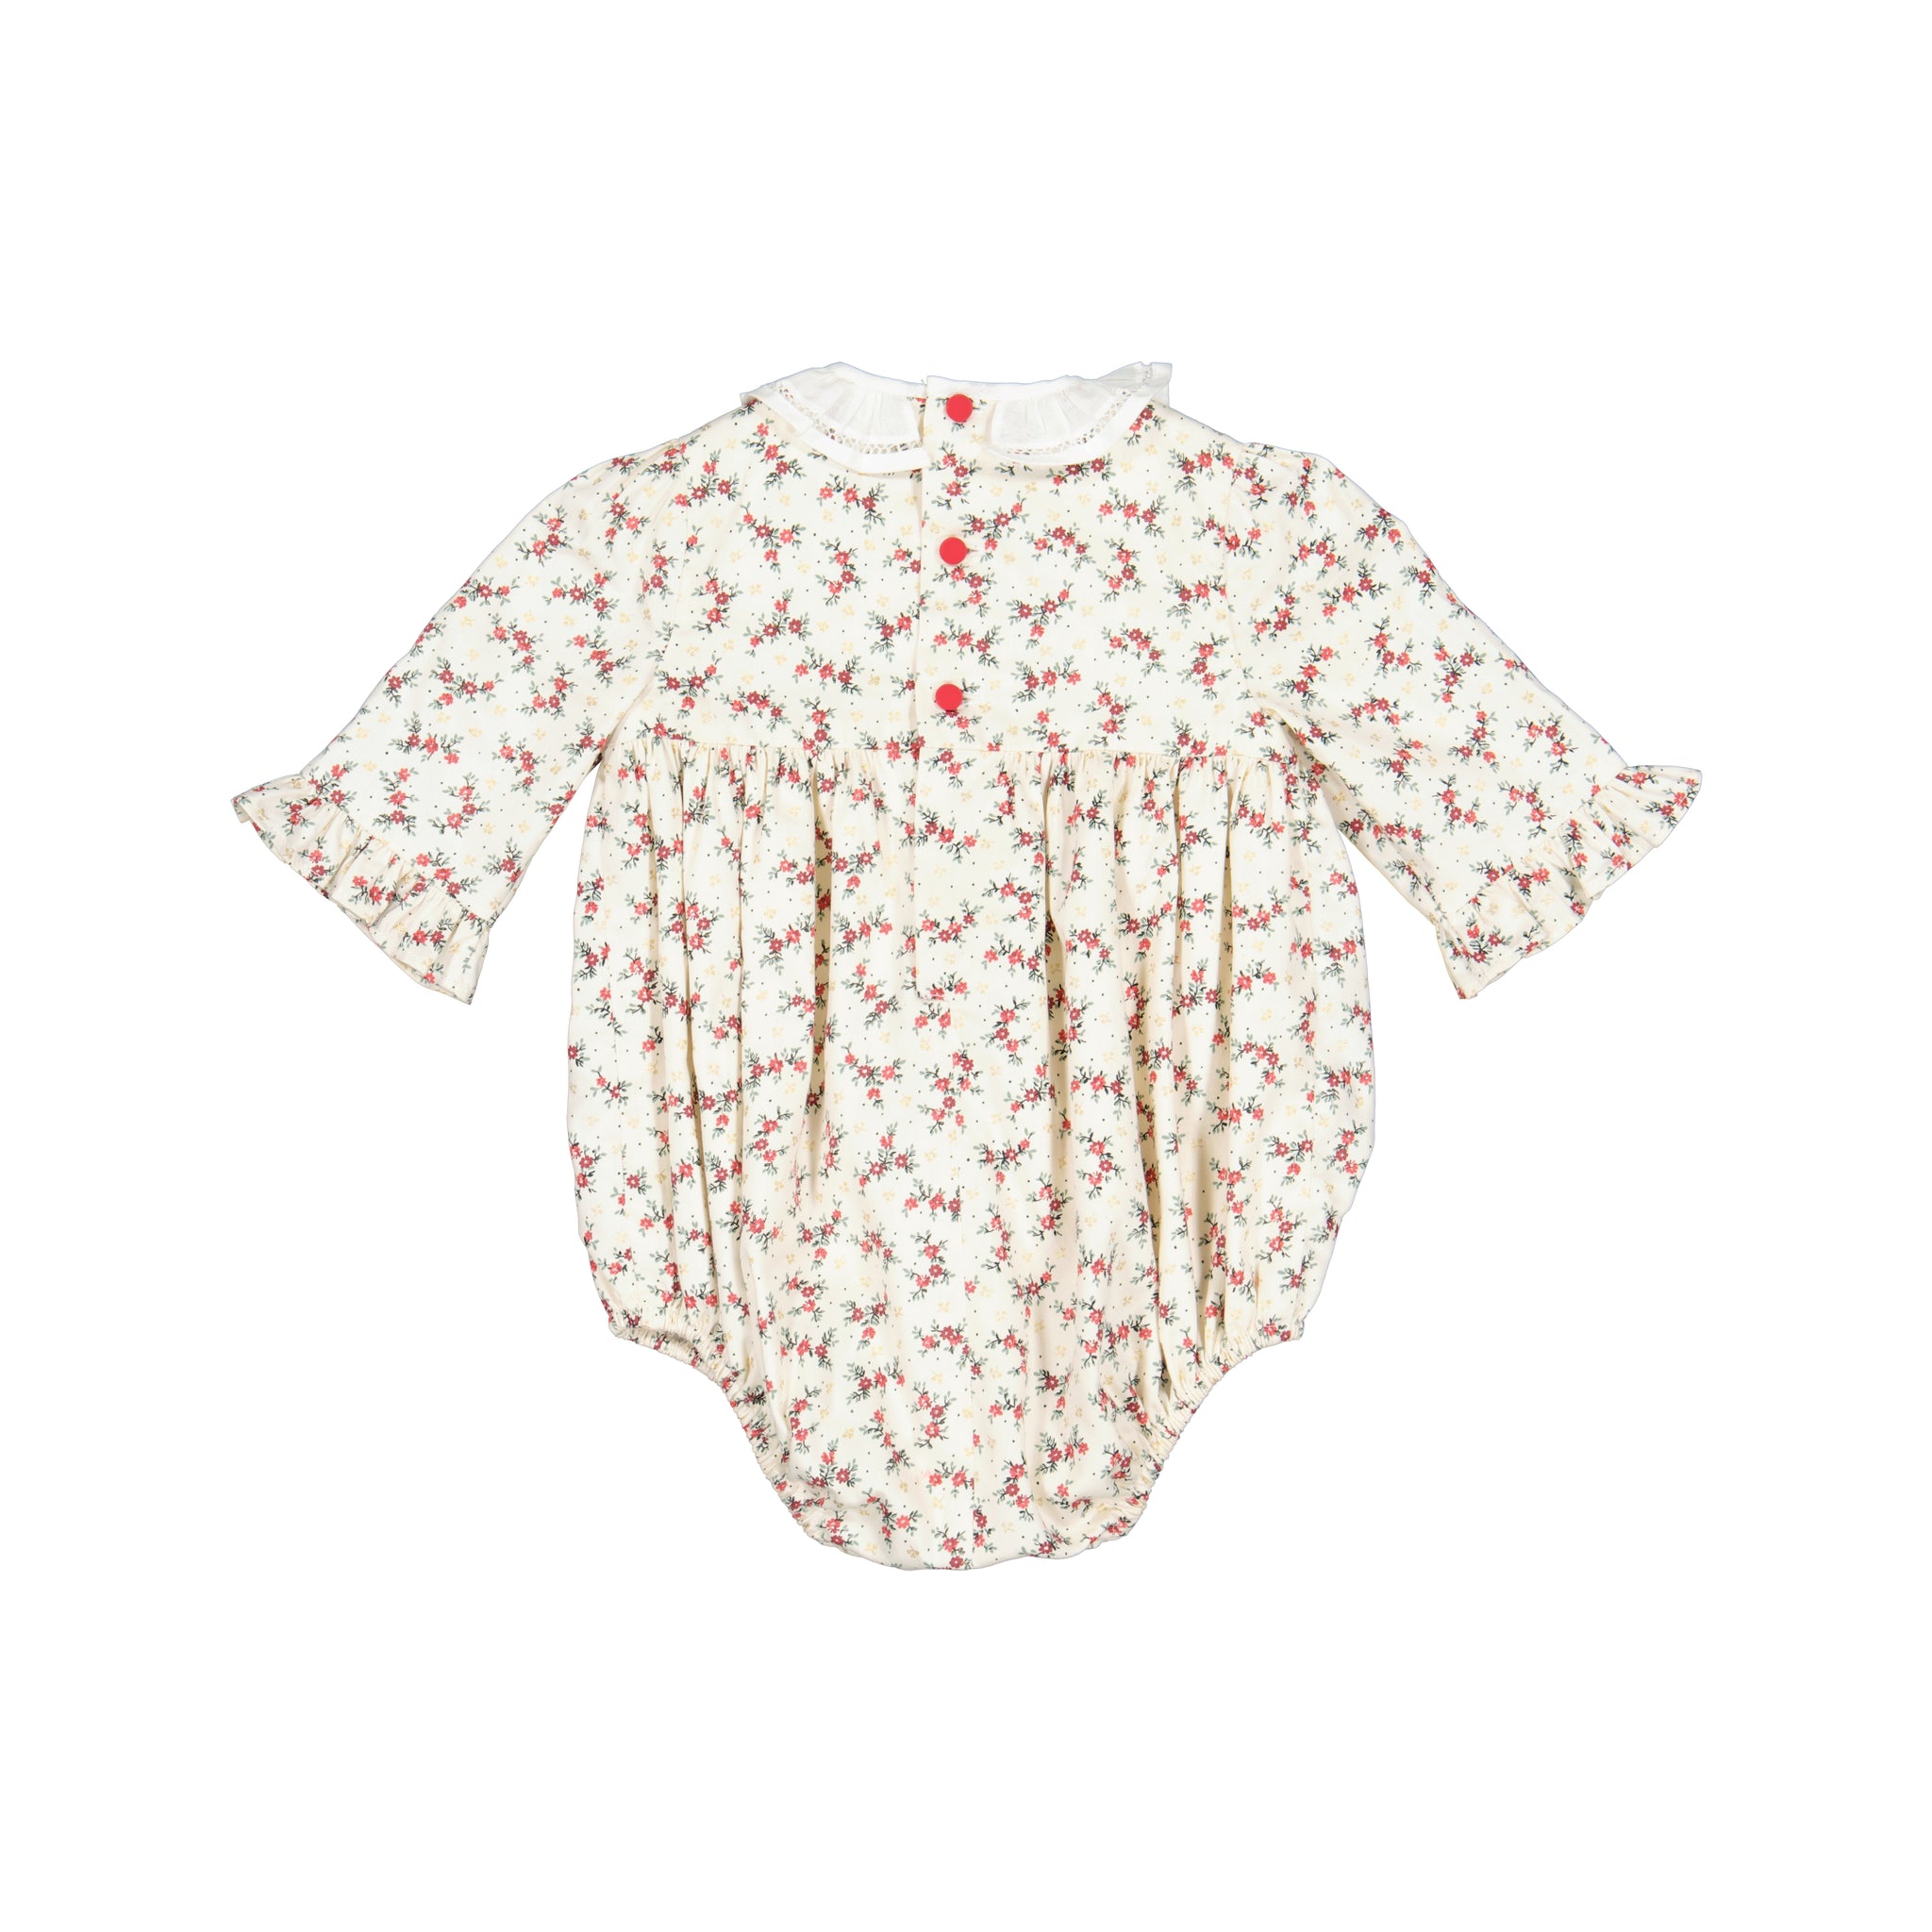 Elizabeth french floral Smocked Baby Bubble